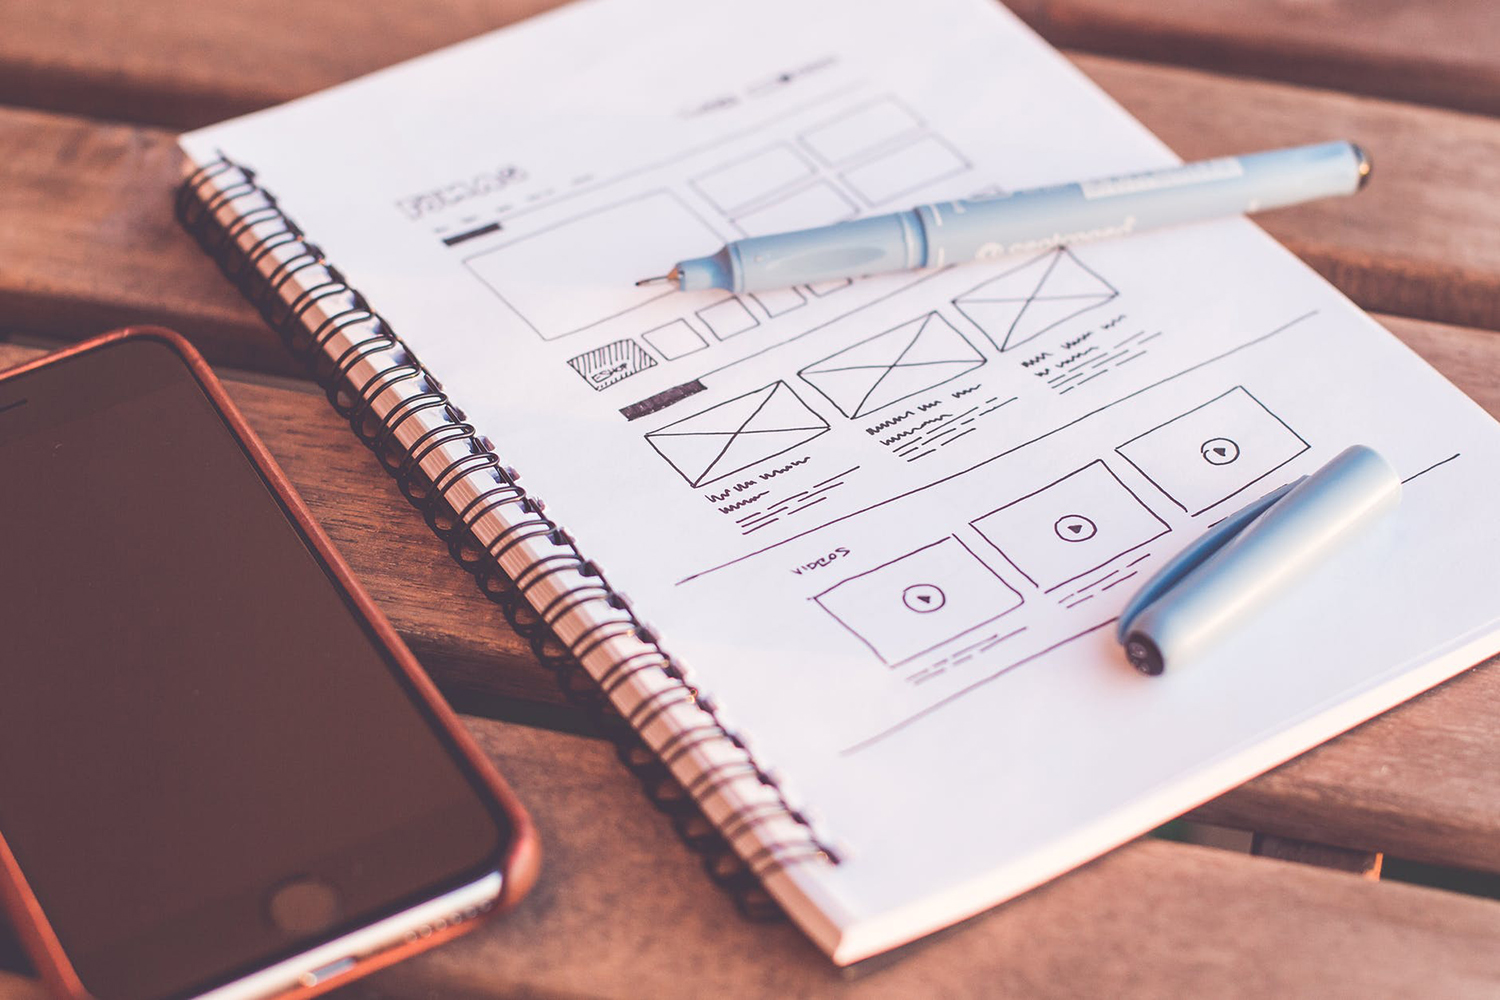 website design outline drawn in a notebook with a phone sitting next to it